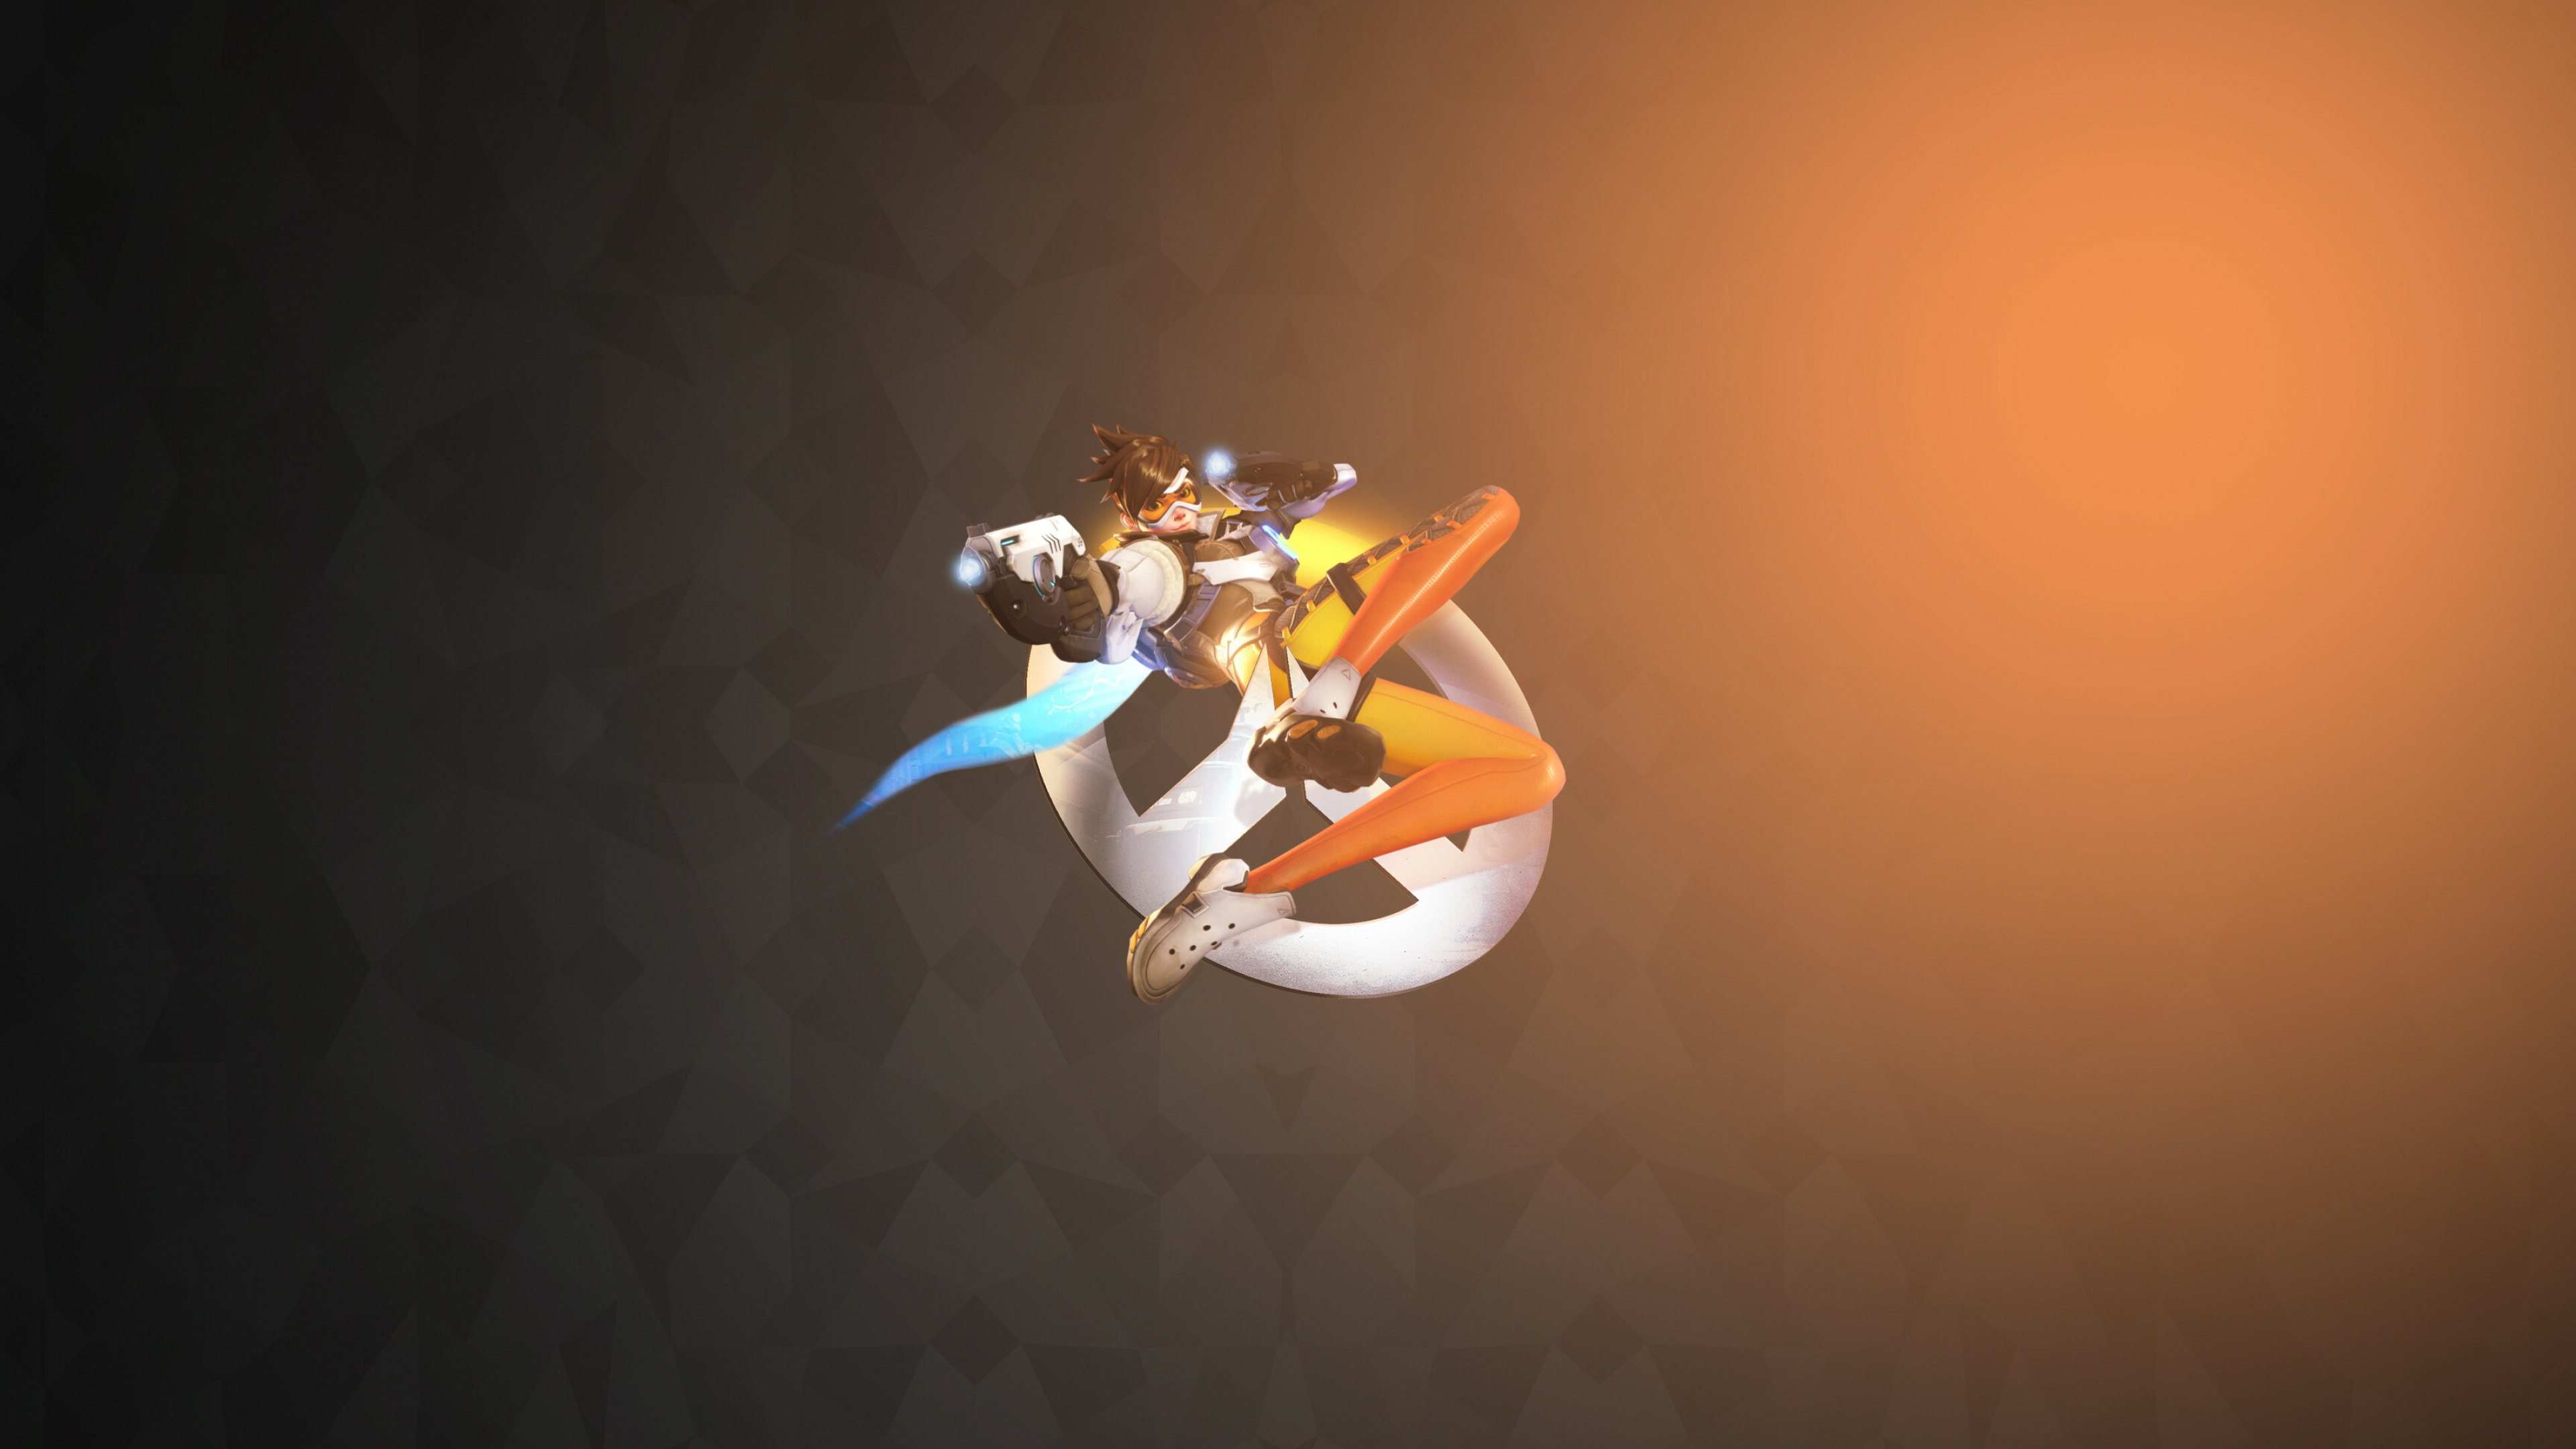 Overwatch: Tracer, A Damage hero, Lena Oxton, Multiplayer. 3840x2160 4K Background.